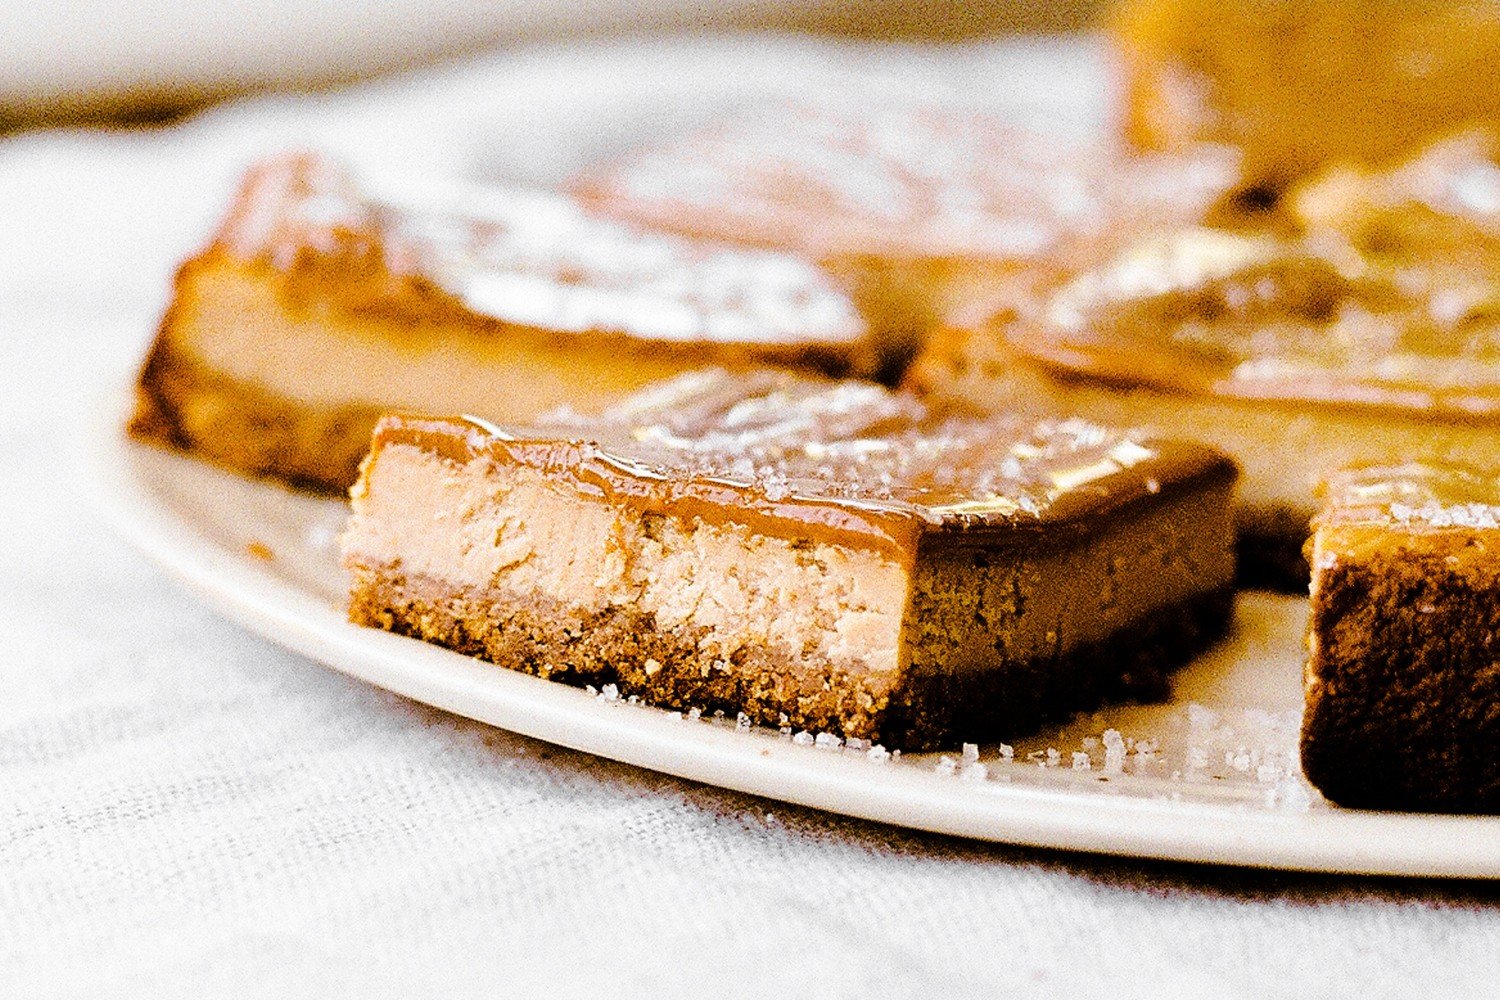 cheesecake bars topped with sauce and sprinkled with flaky sea salt, on a white plate.